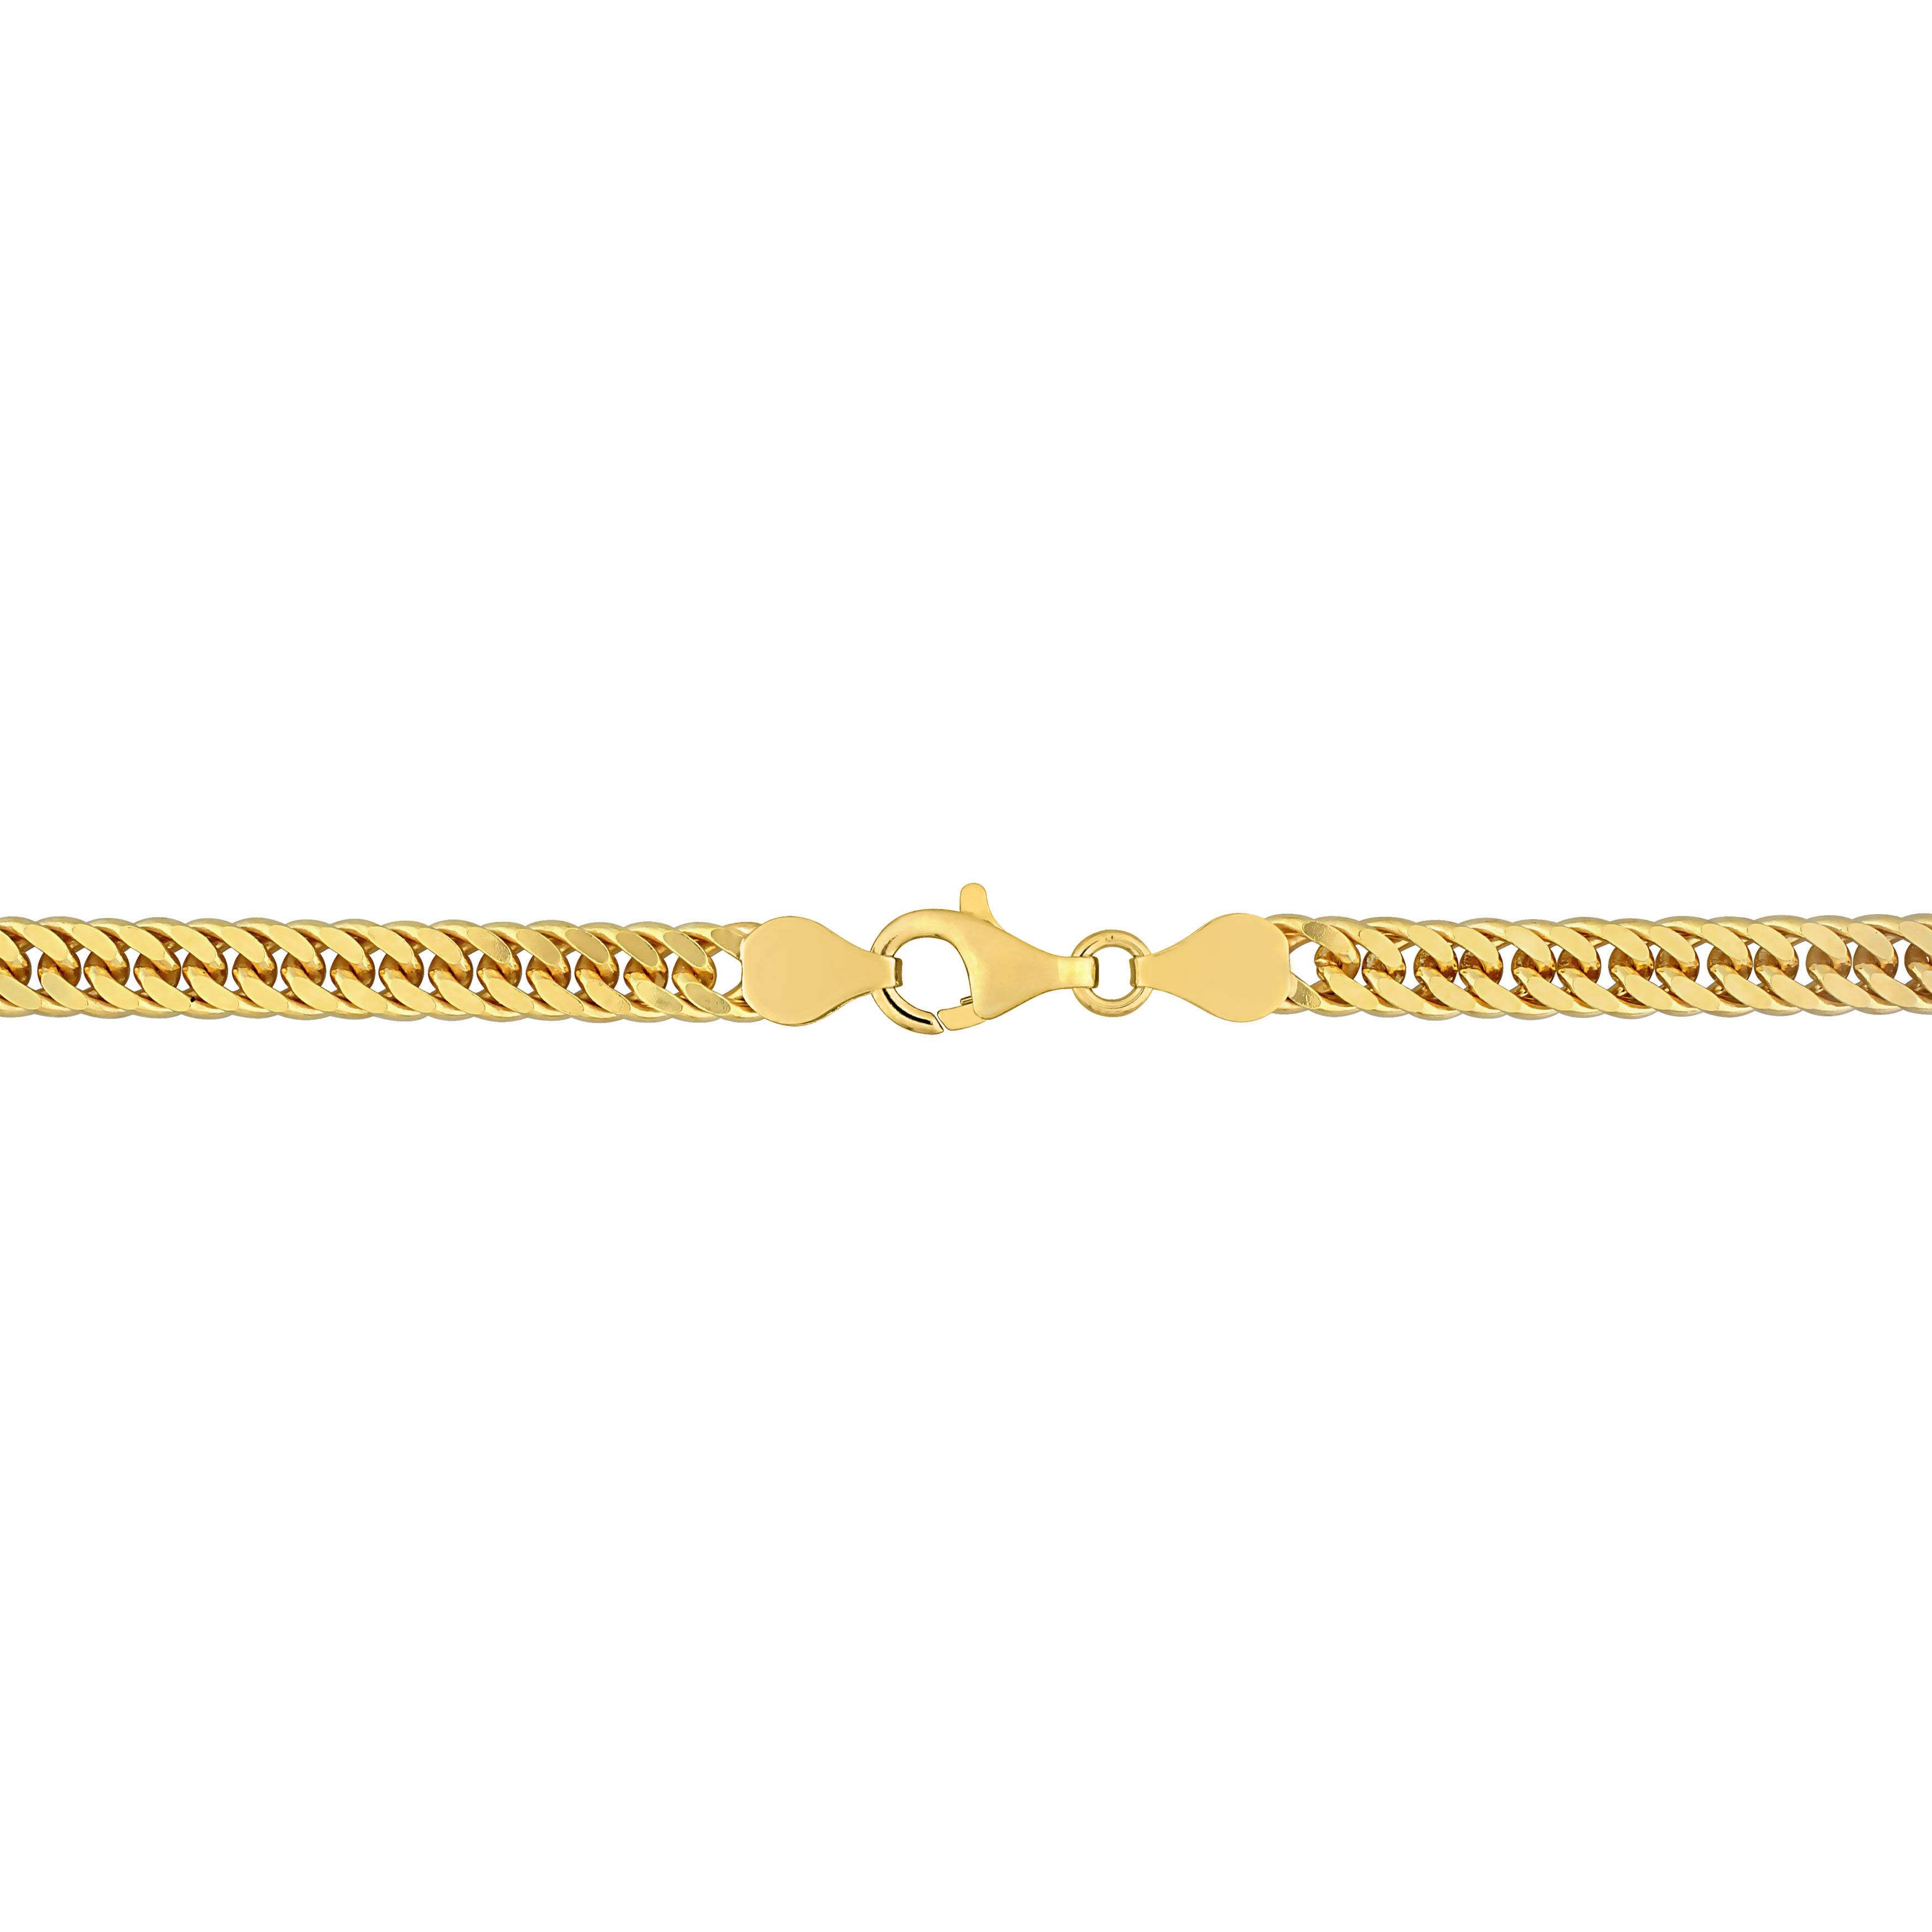 5.5mm Double Curb Link Chain Bracelet in 18k Yellow Gold Plated Sterling Silver - 9 in.